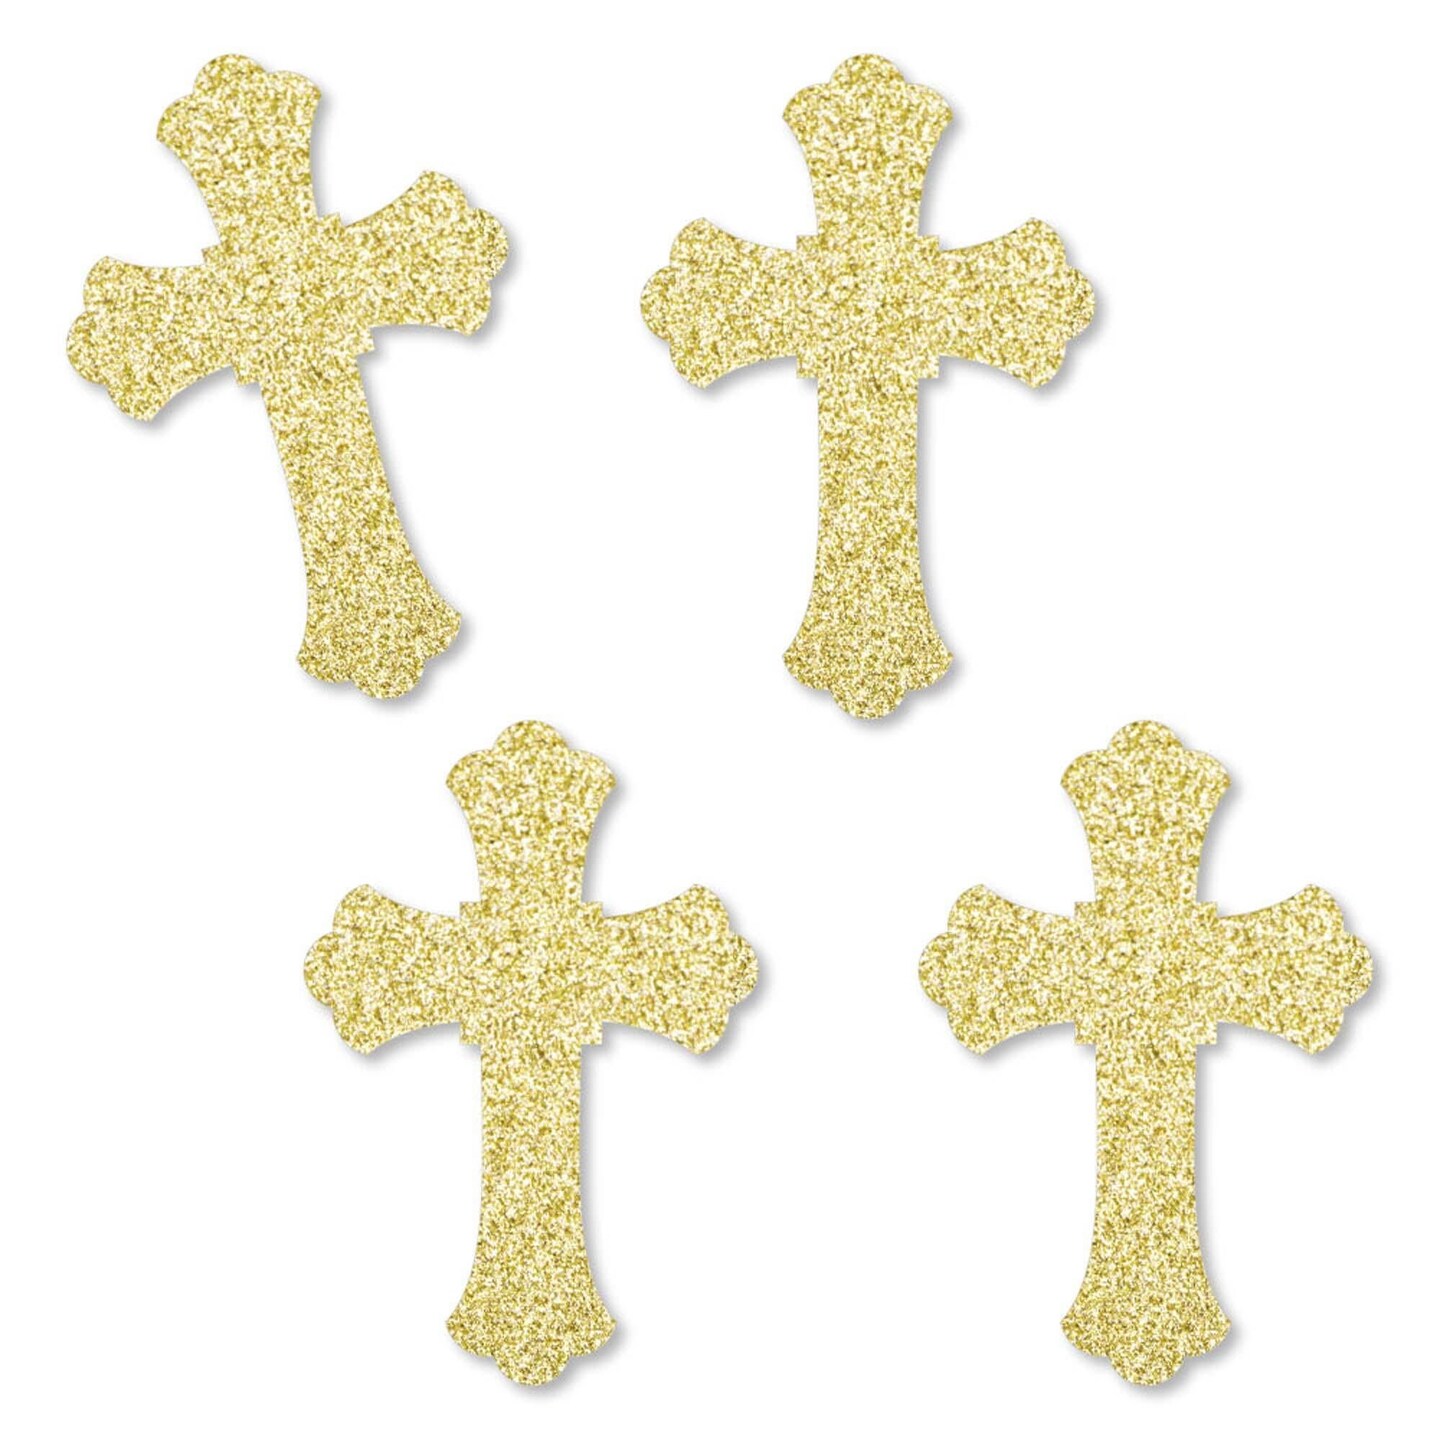 Big Dot of Happiness Gold Glitter Cross - No-Mess Real Gold Glitter Cut-Outs - Baptism or Baby Shower Confetti - Set of 24